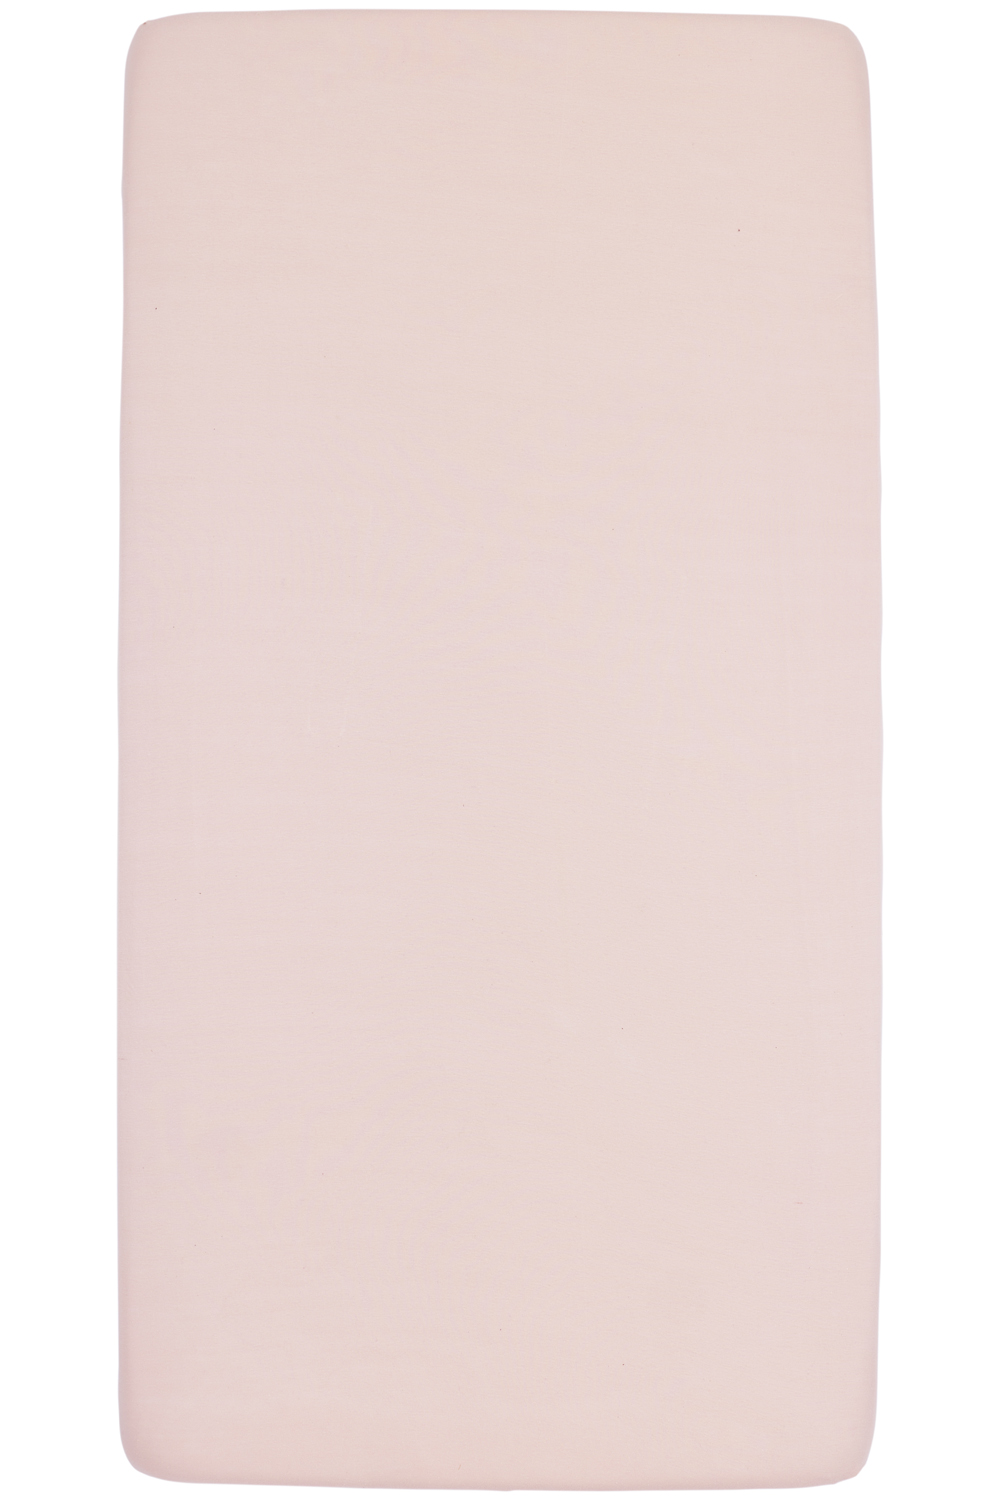 Fitted sheet juniorbed Uni - soft pink - 70x140/150cm